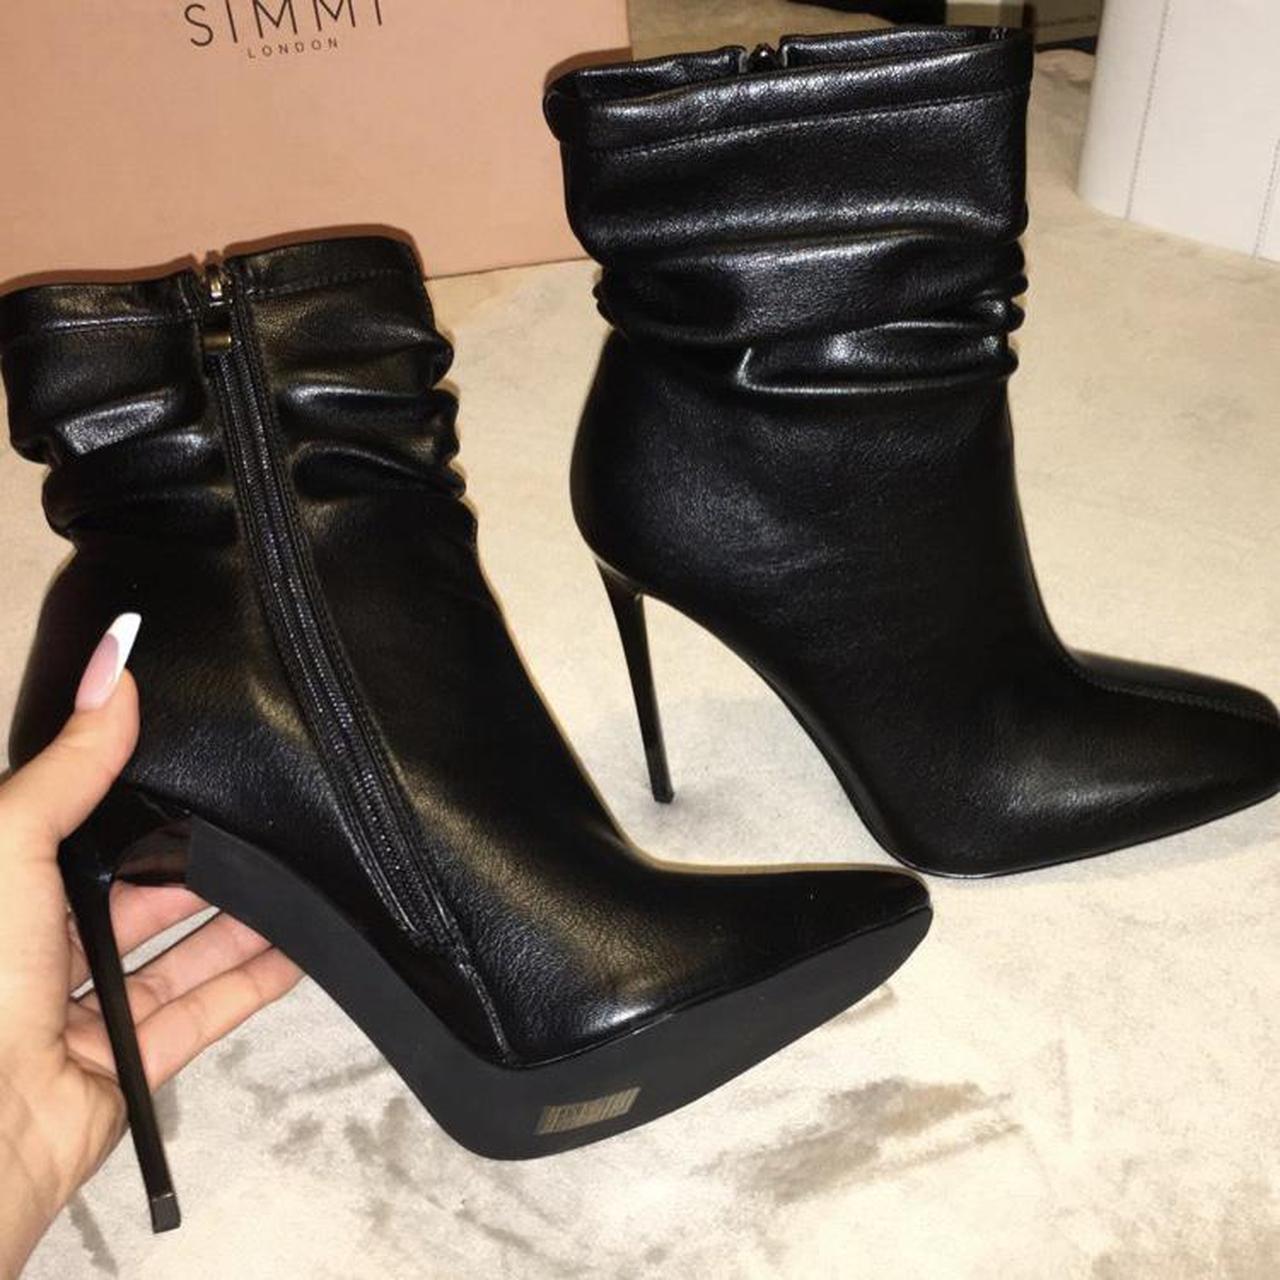 SIMMI LONDON HIGH HEEL ANKLE BOOTS In Black Size... - Depop